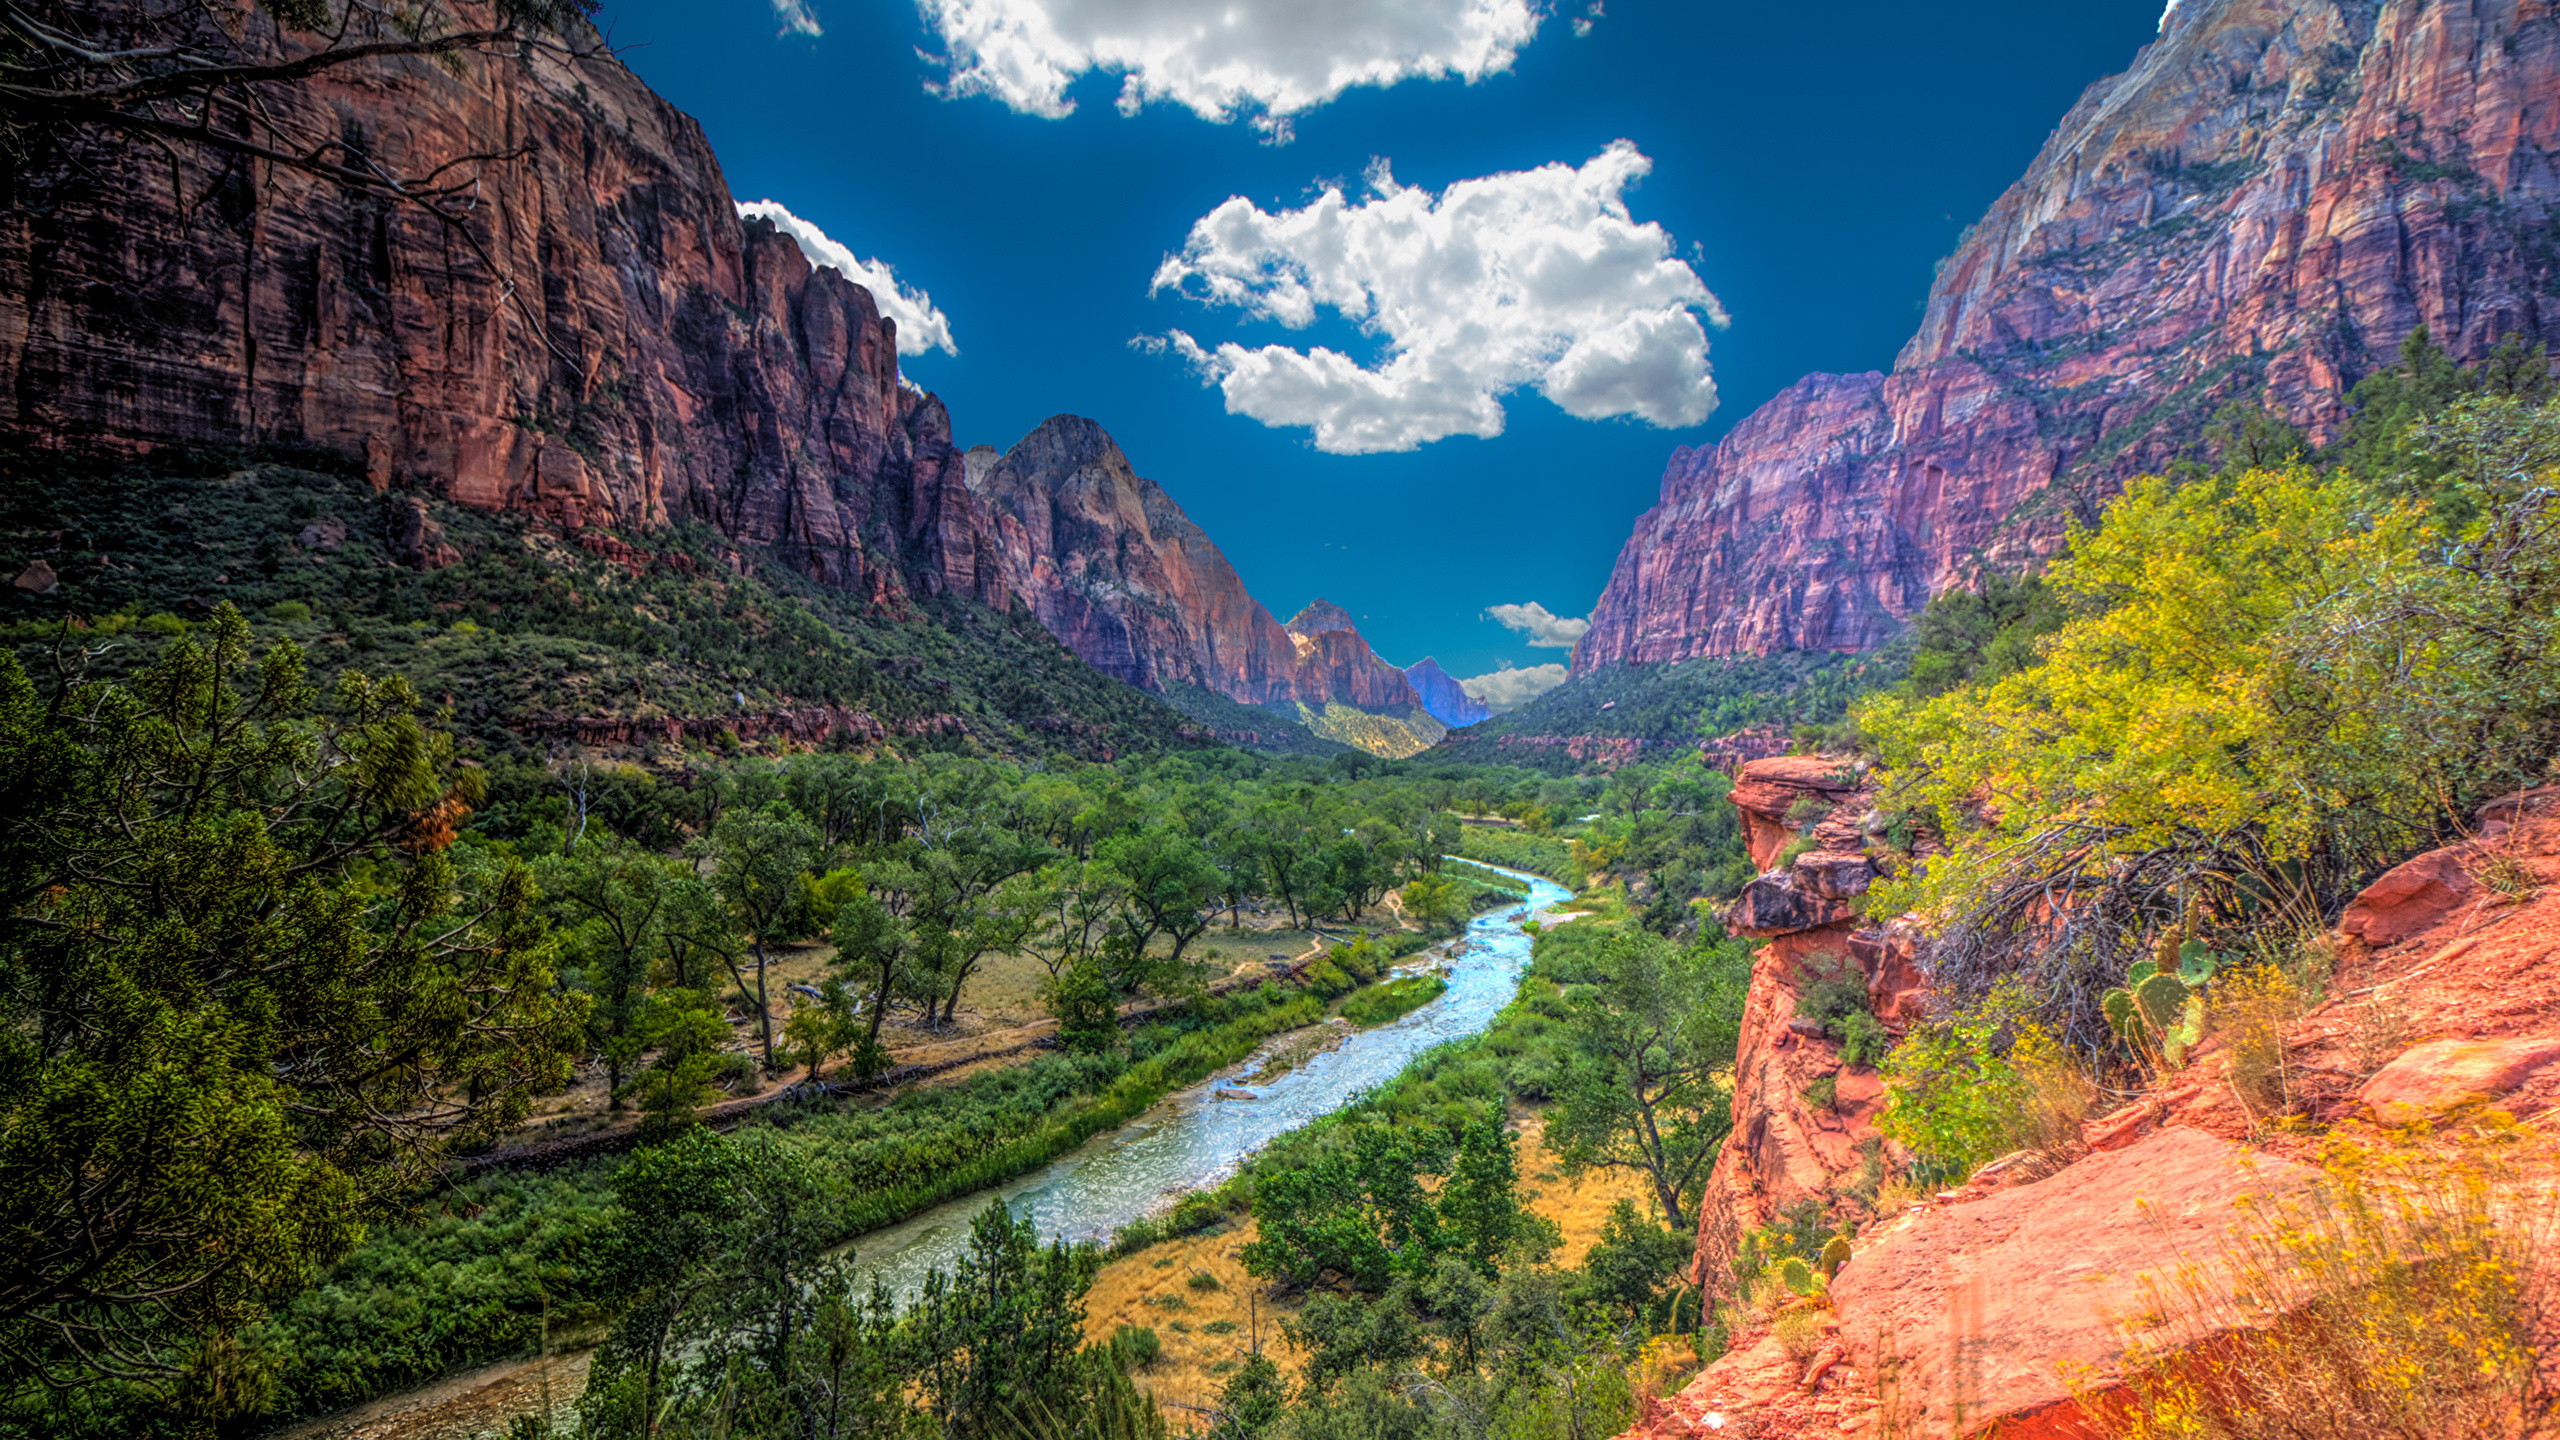 Details more than 86 zion national park wallpaper latest - in.coedo.com.vn